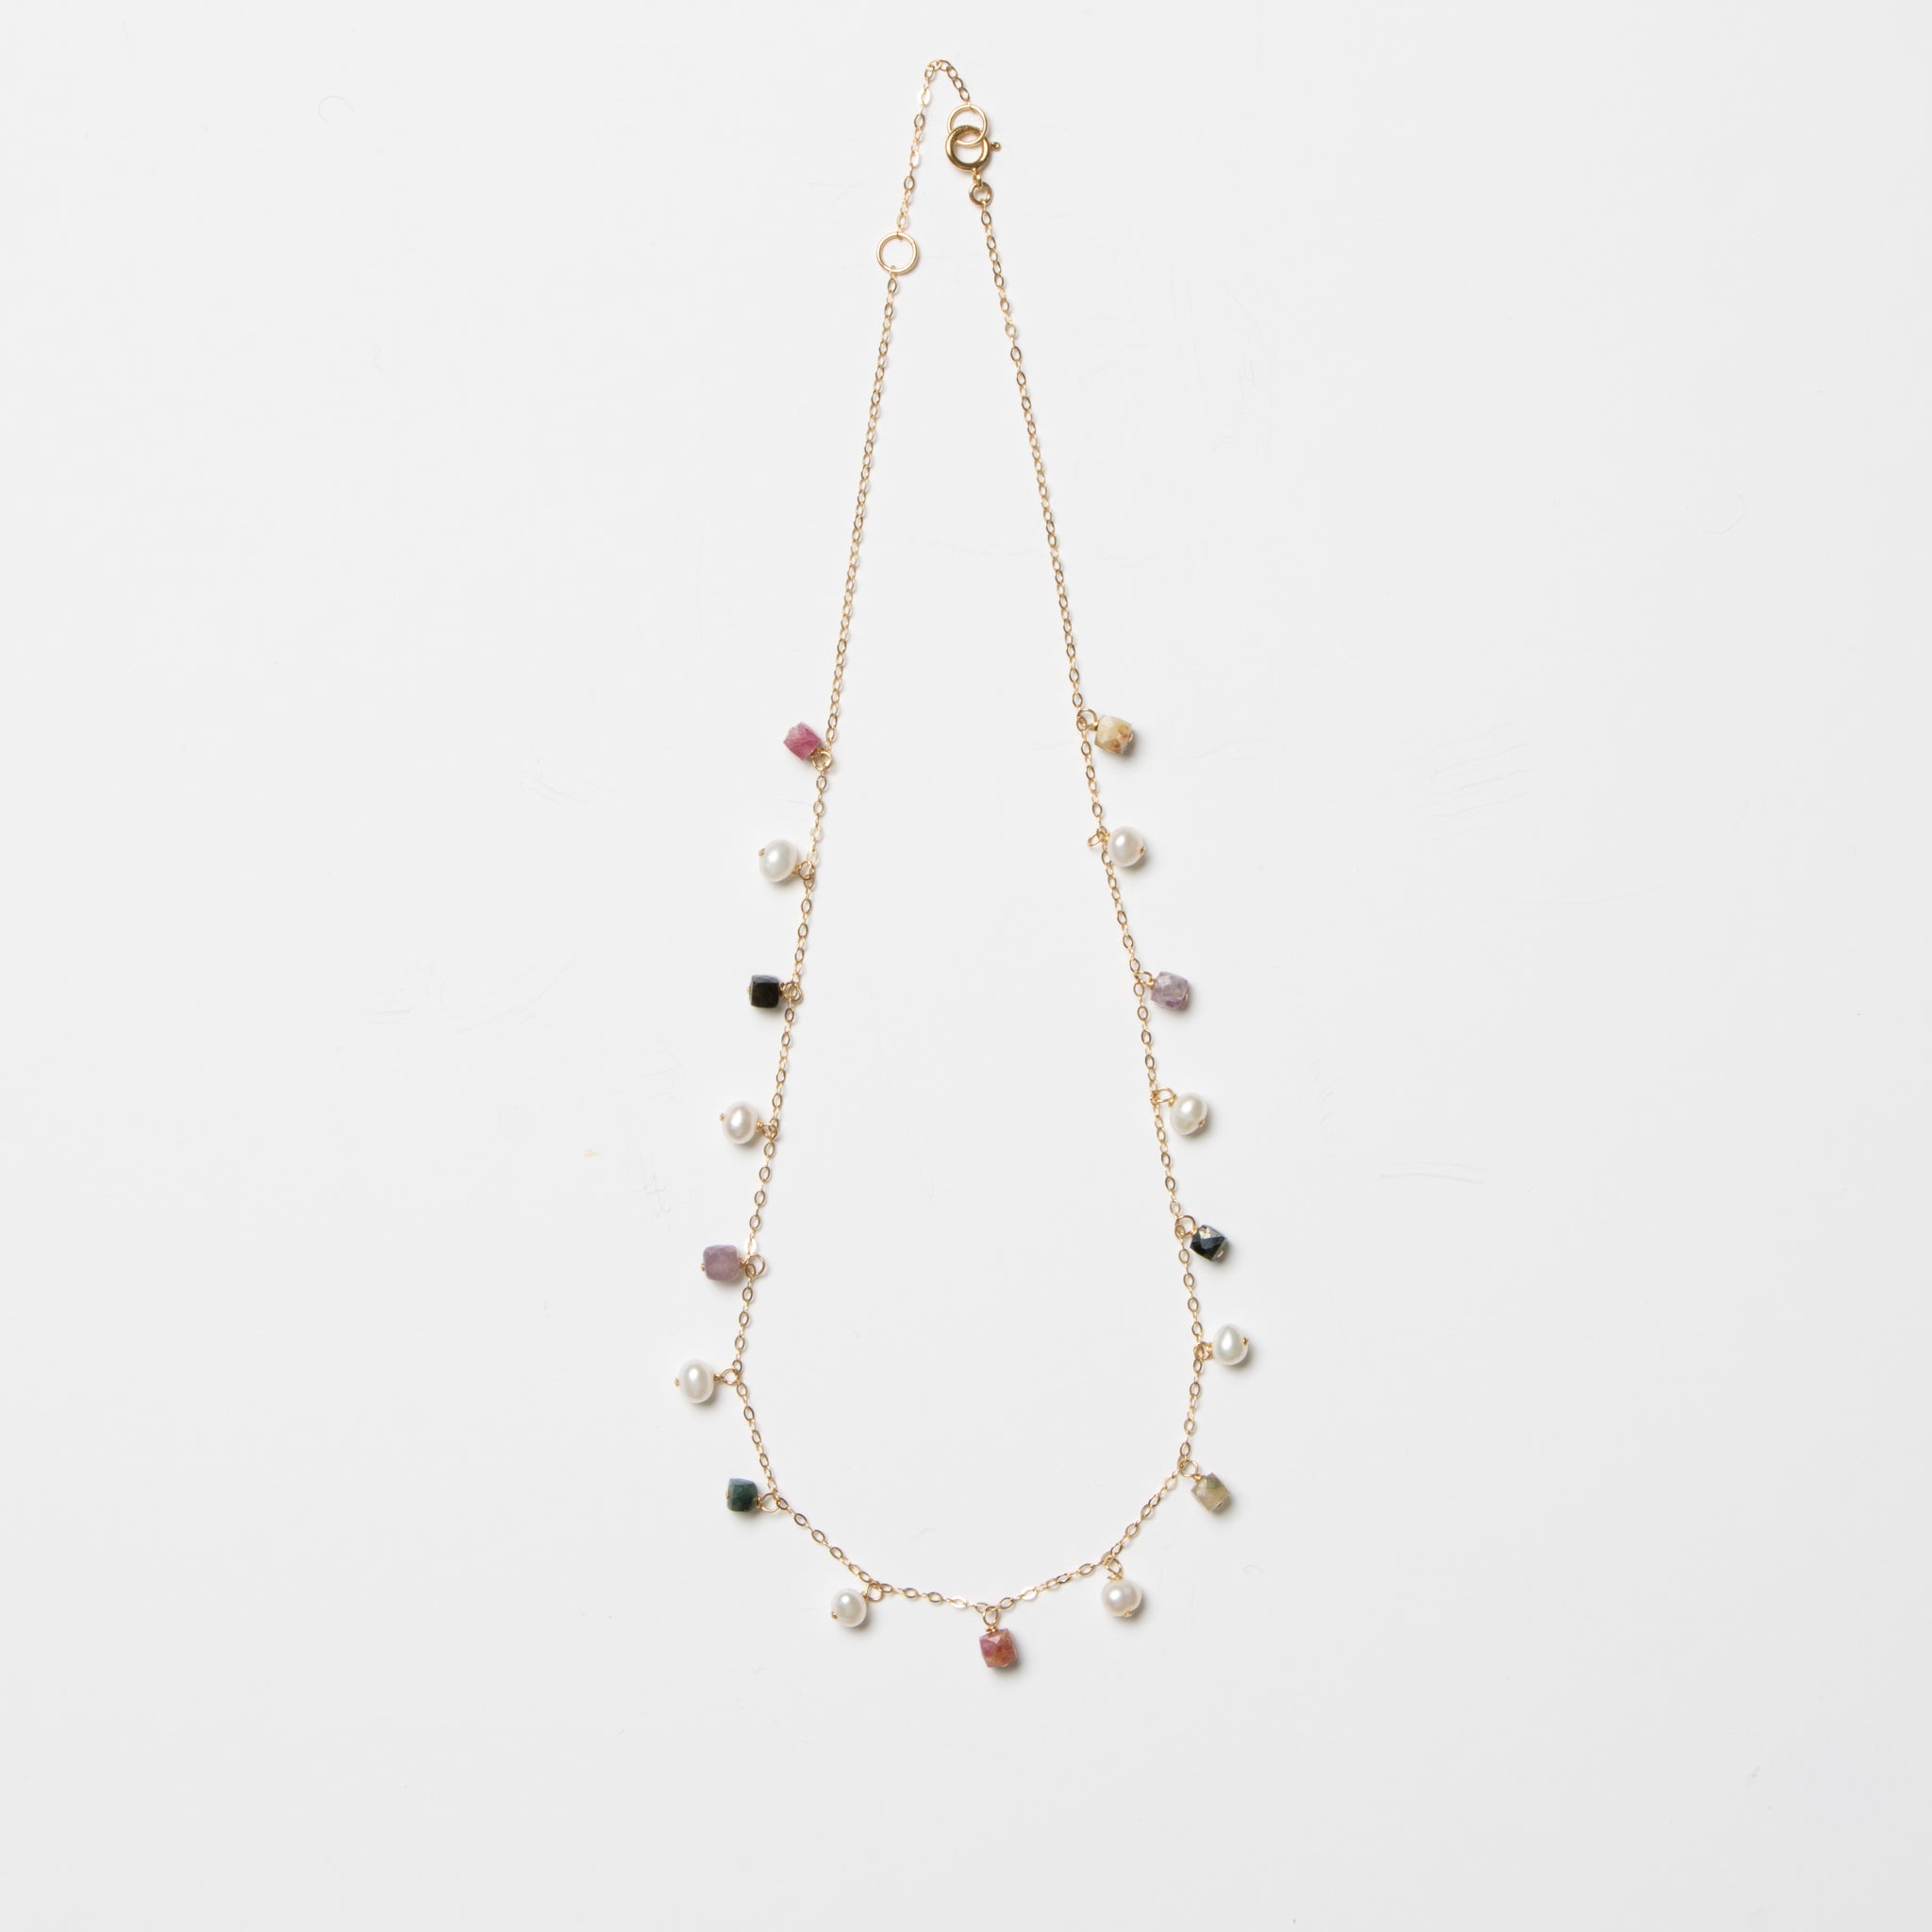 Dancing Pearls & Tourmalines Necklace